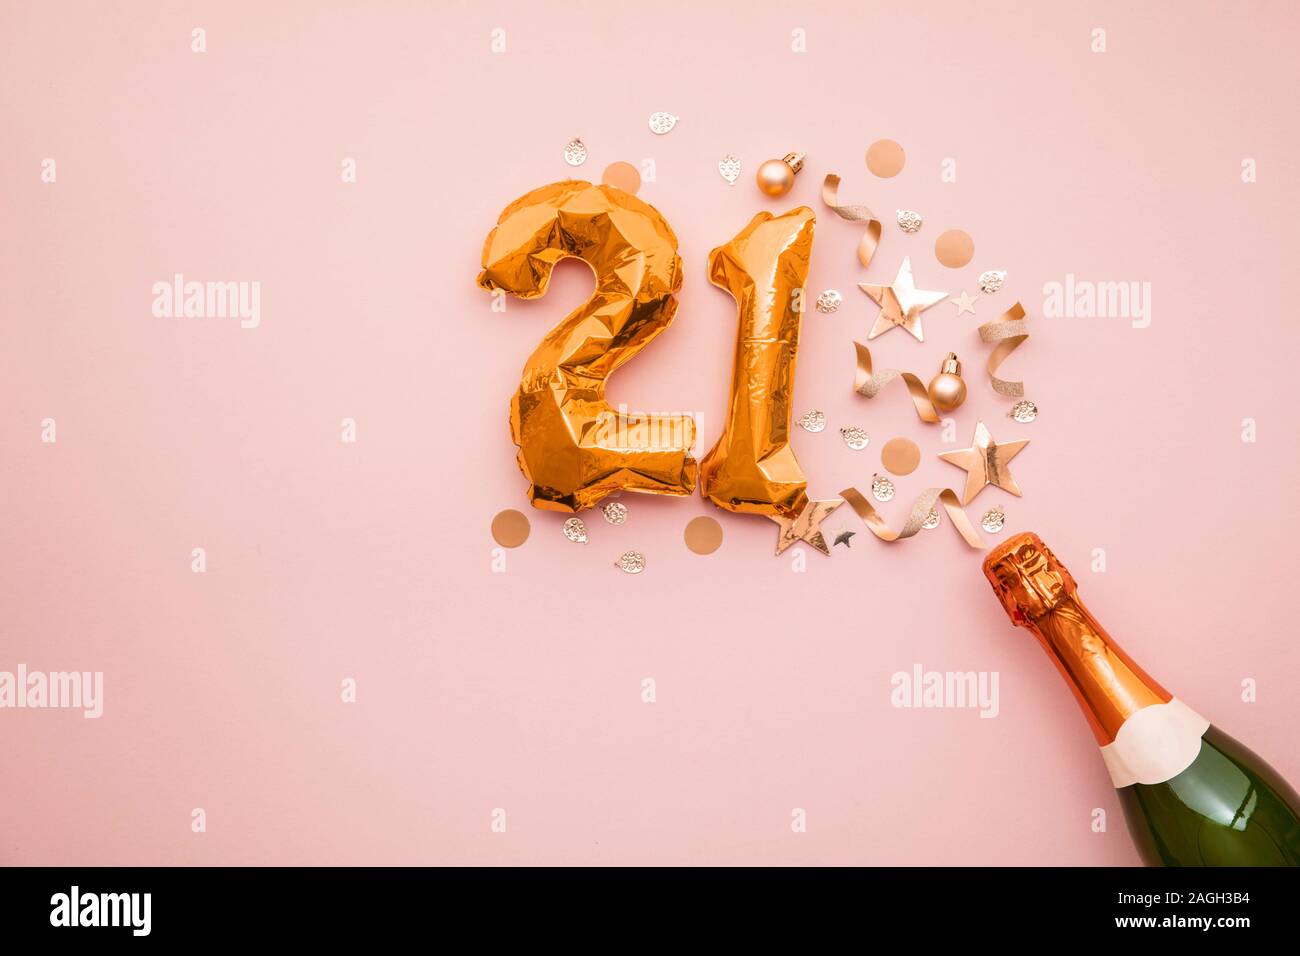 Happy 21st anniversary party. Champagne bottle with gold number balloon. Stock Photo